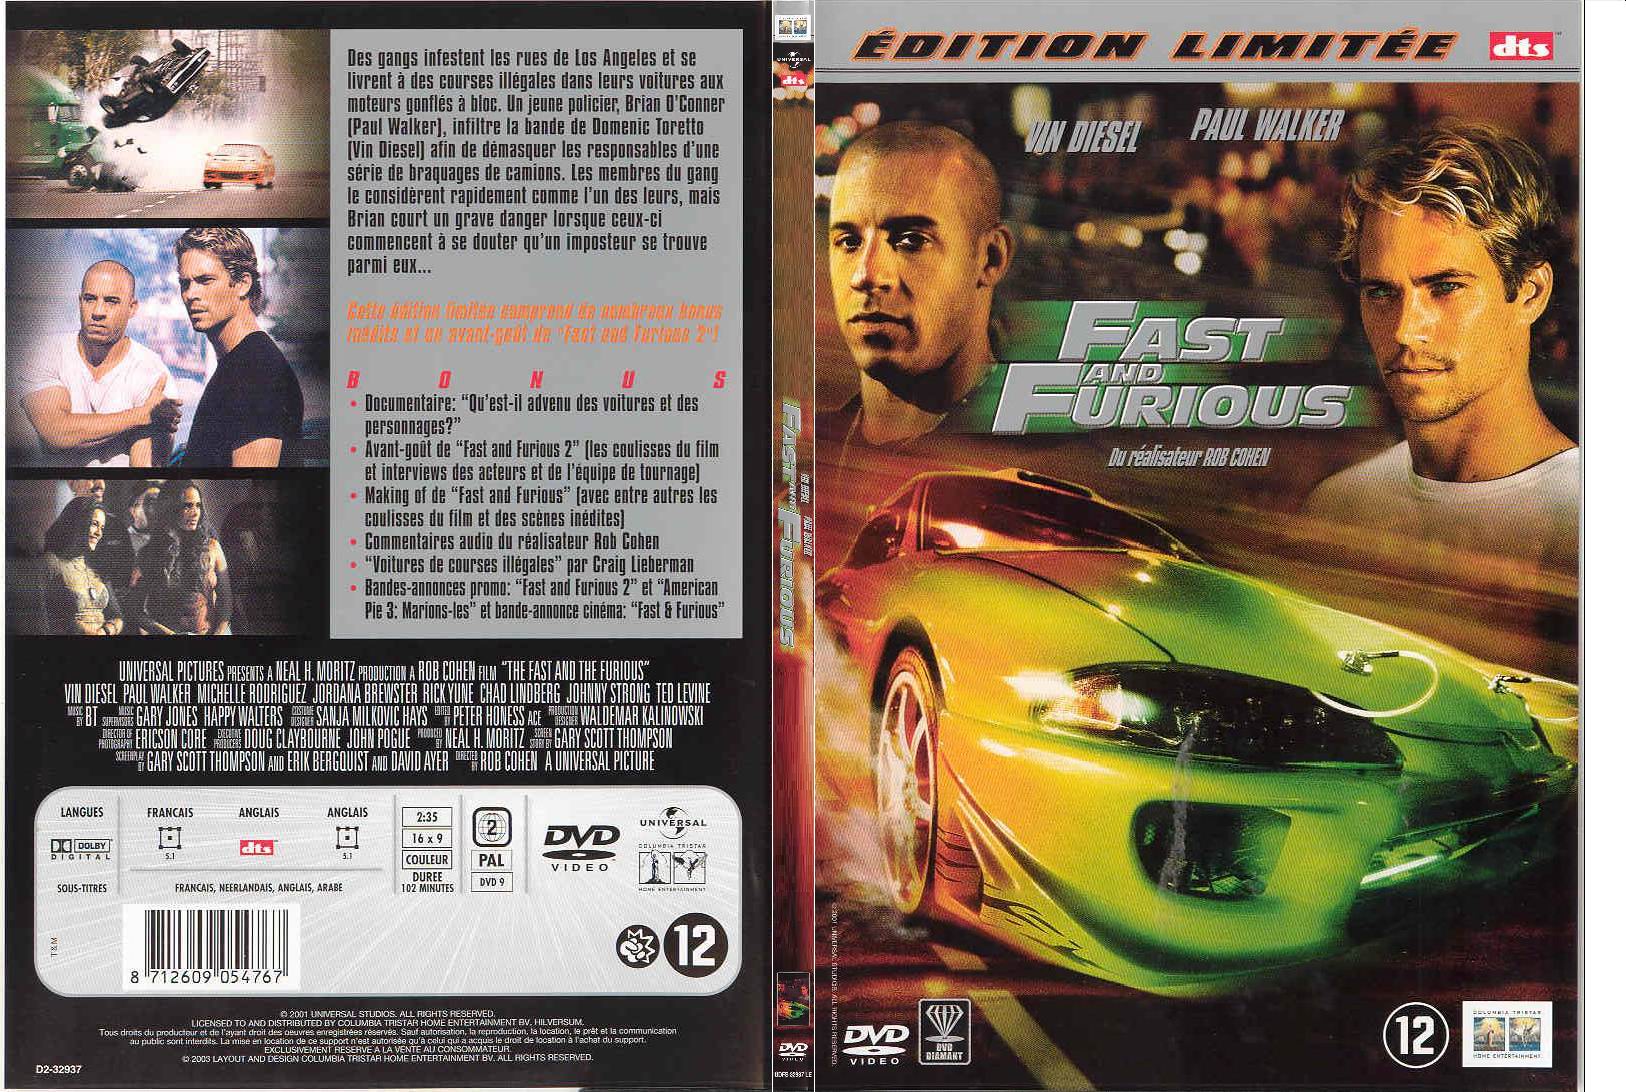 Jaquette DVD Fast and furious - SLIM